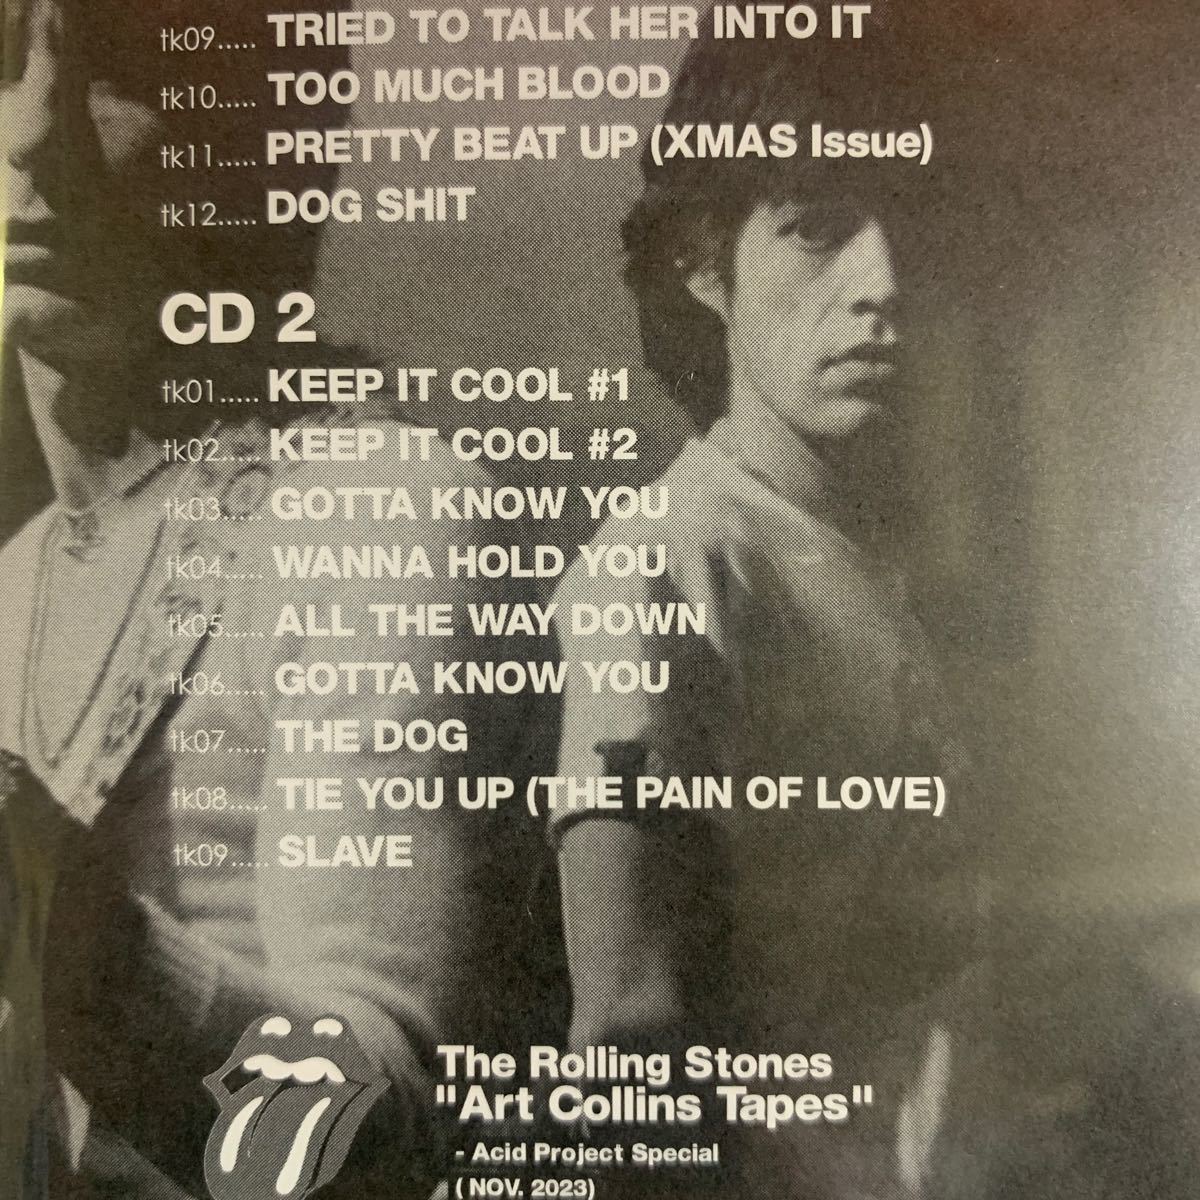 THE ROLLING STONES / Art Collins Tapes Acid Project Special Version (2023) 4CD 最新バージョン！極上の音質で堪能できる50トラック！_画像4